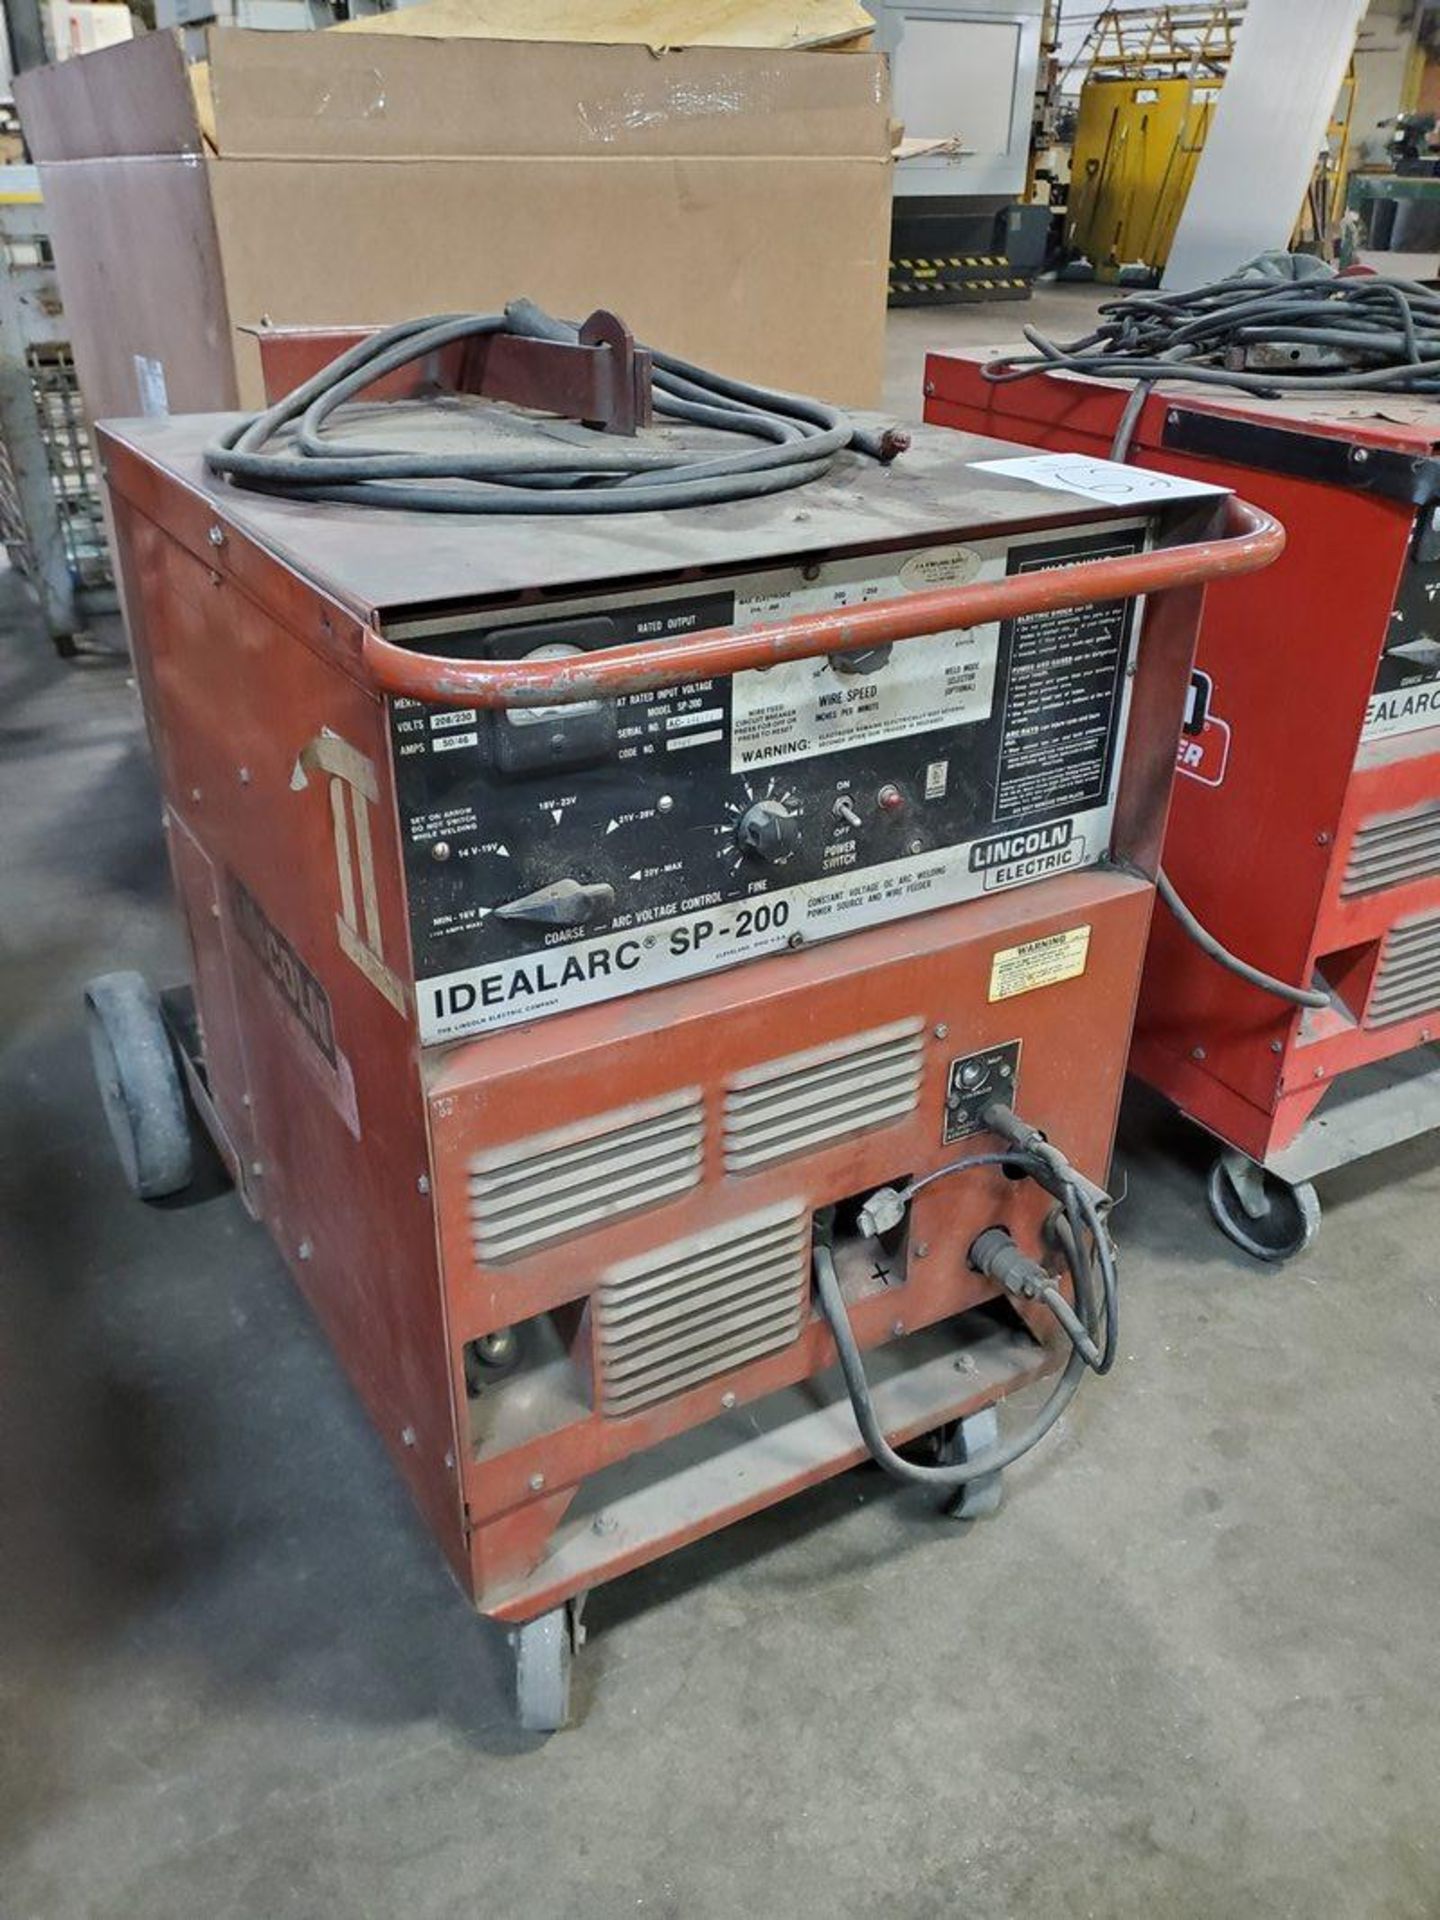 Lincoln Idealarc SP-200, 200-Amp Welding Power Supply, S/N AC-548173 - Image 2 of 2